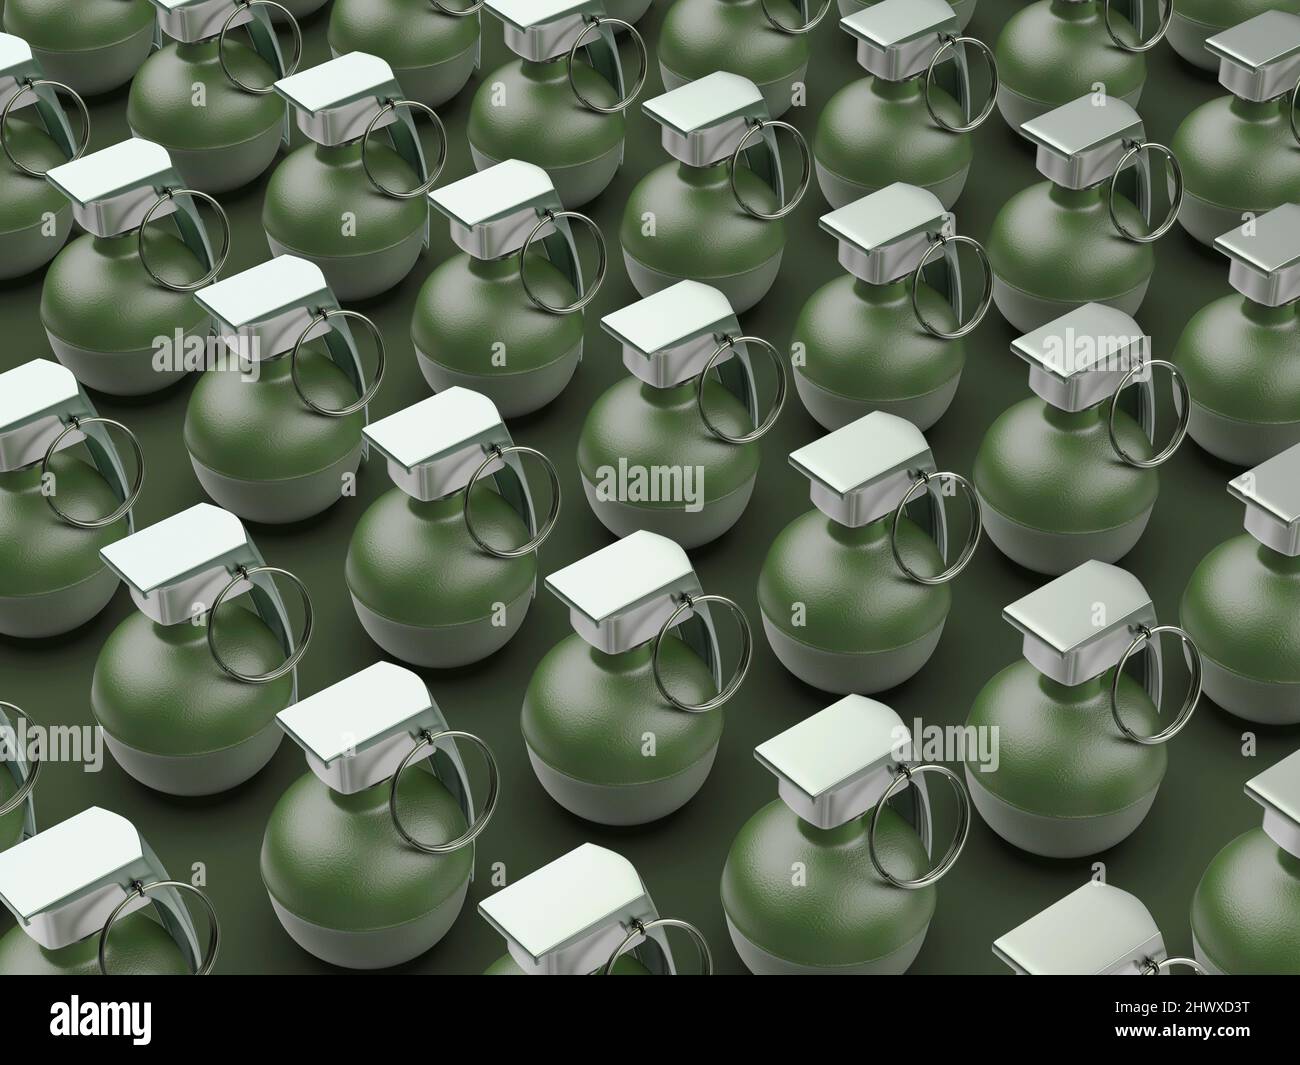 Many rows with hand grenades Stock Photo